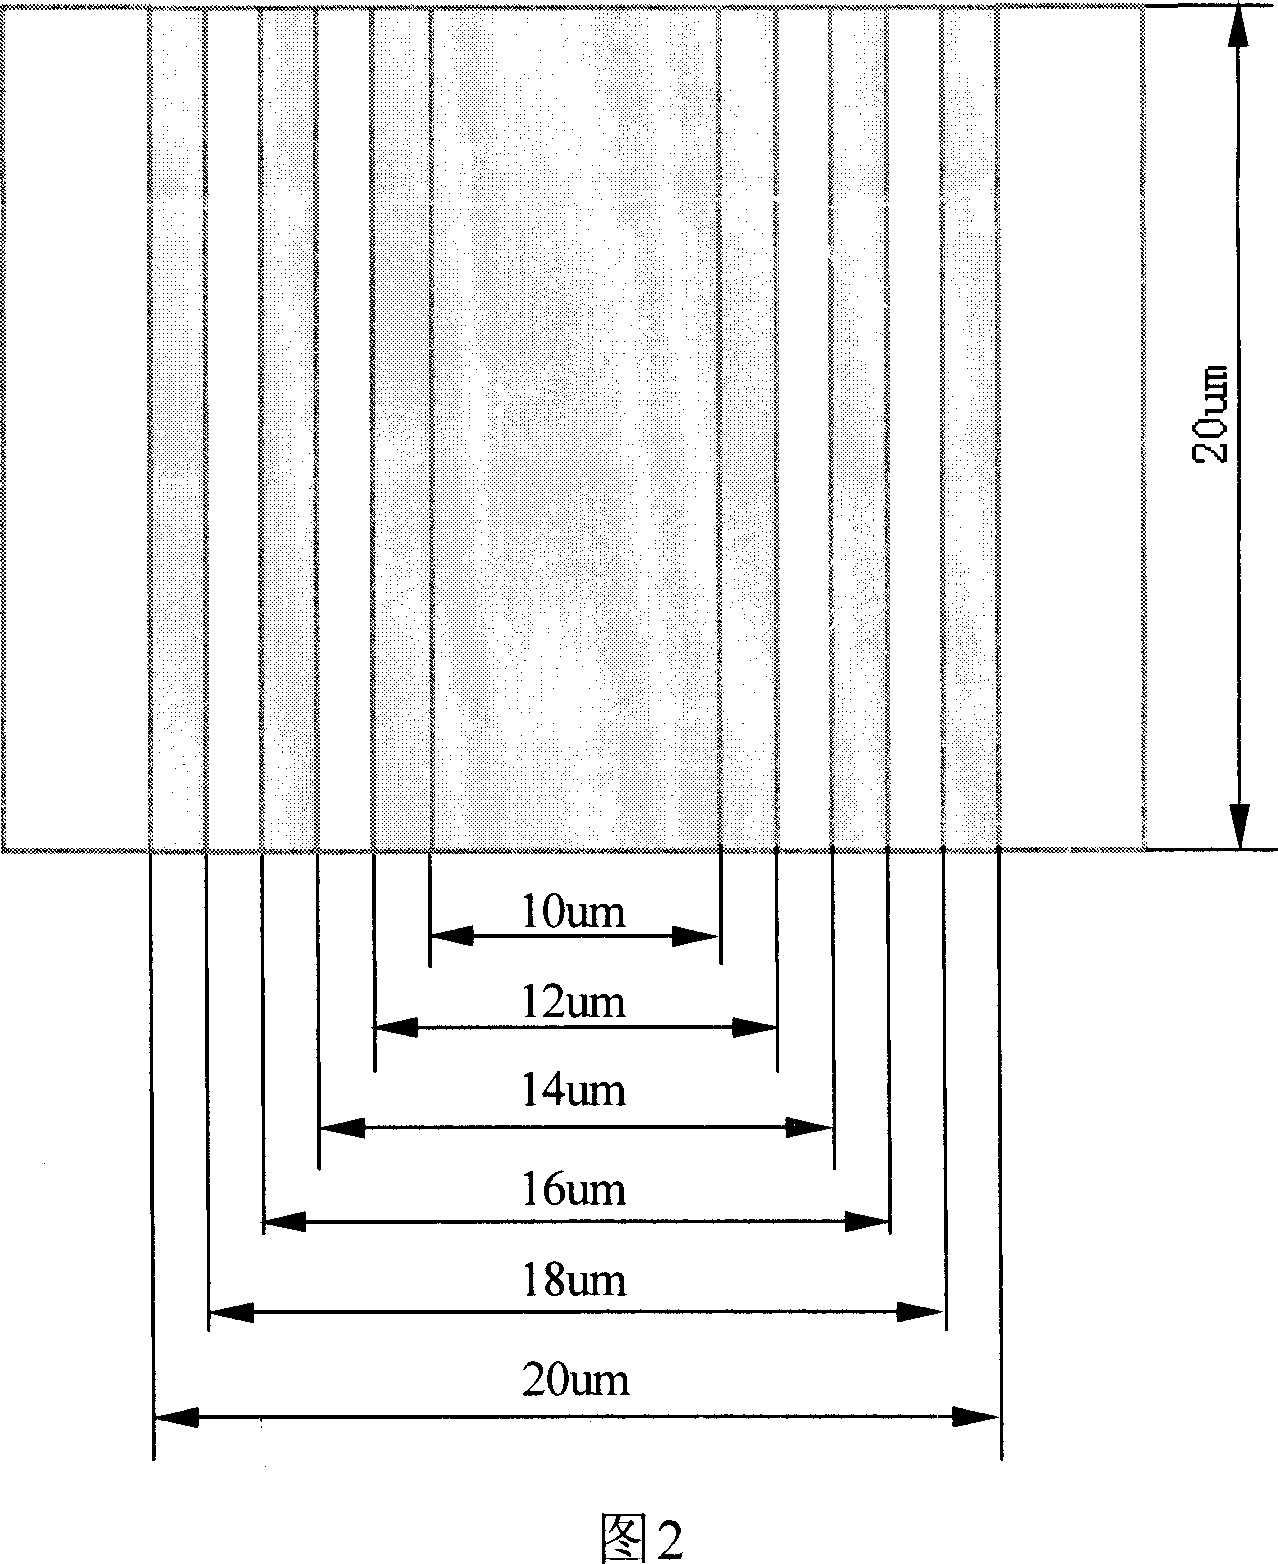 Nano multi-step height sample plate and its preparation